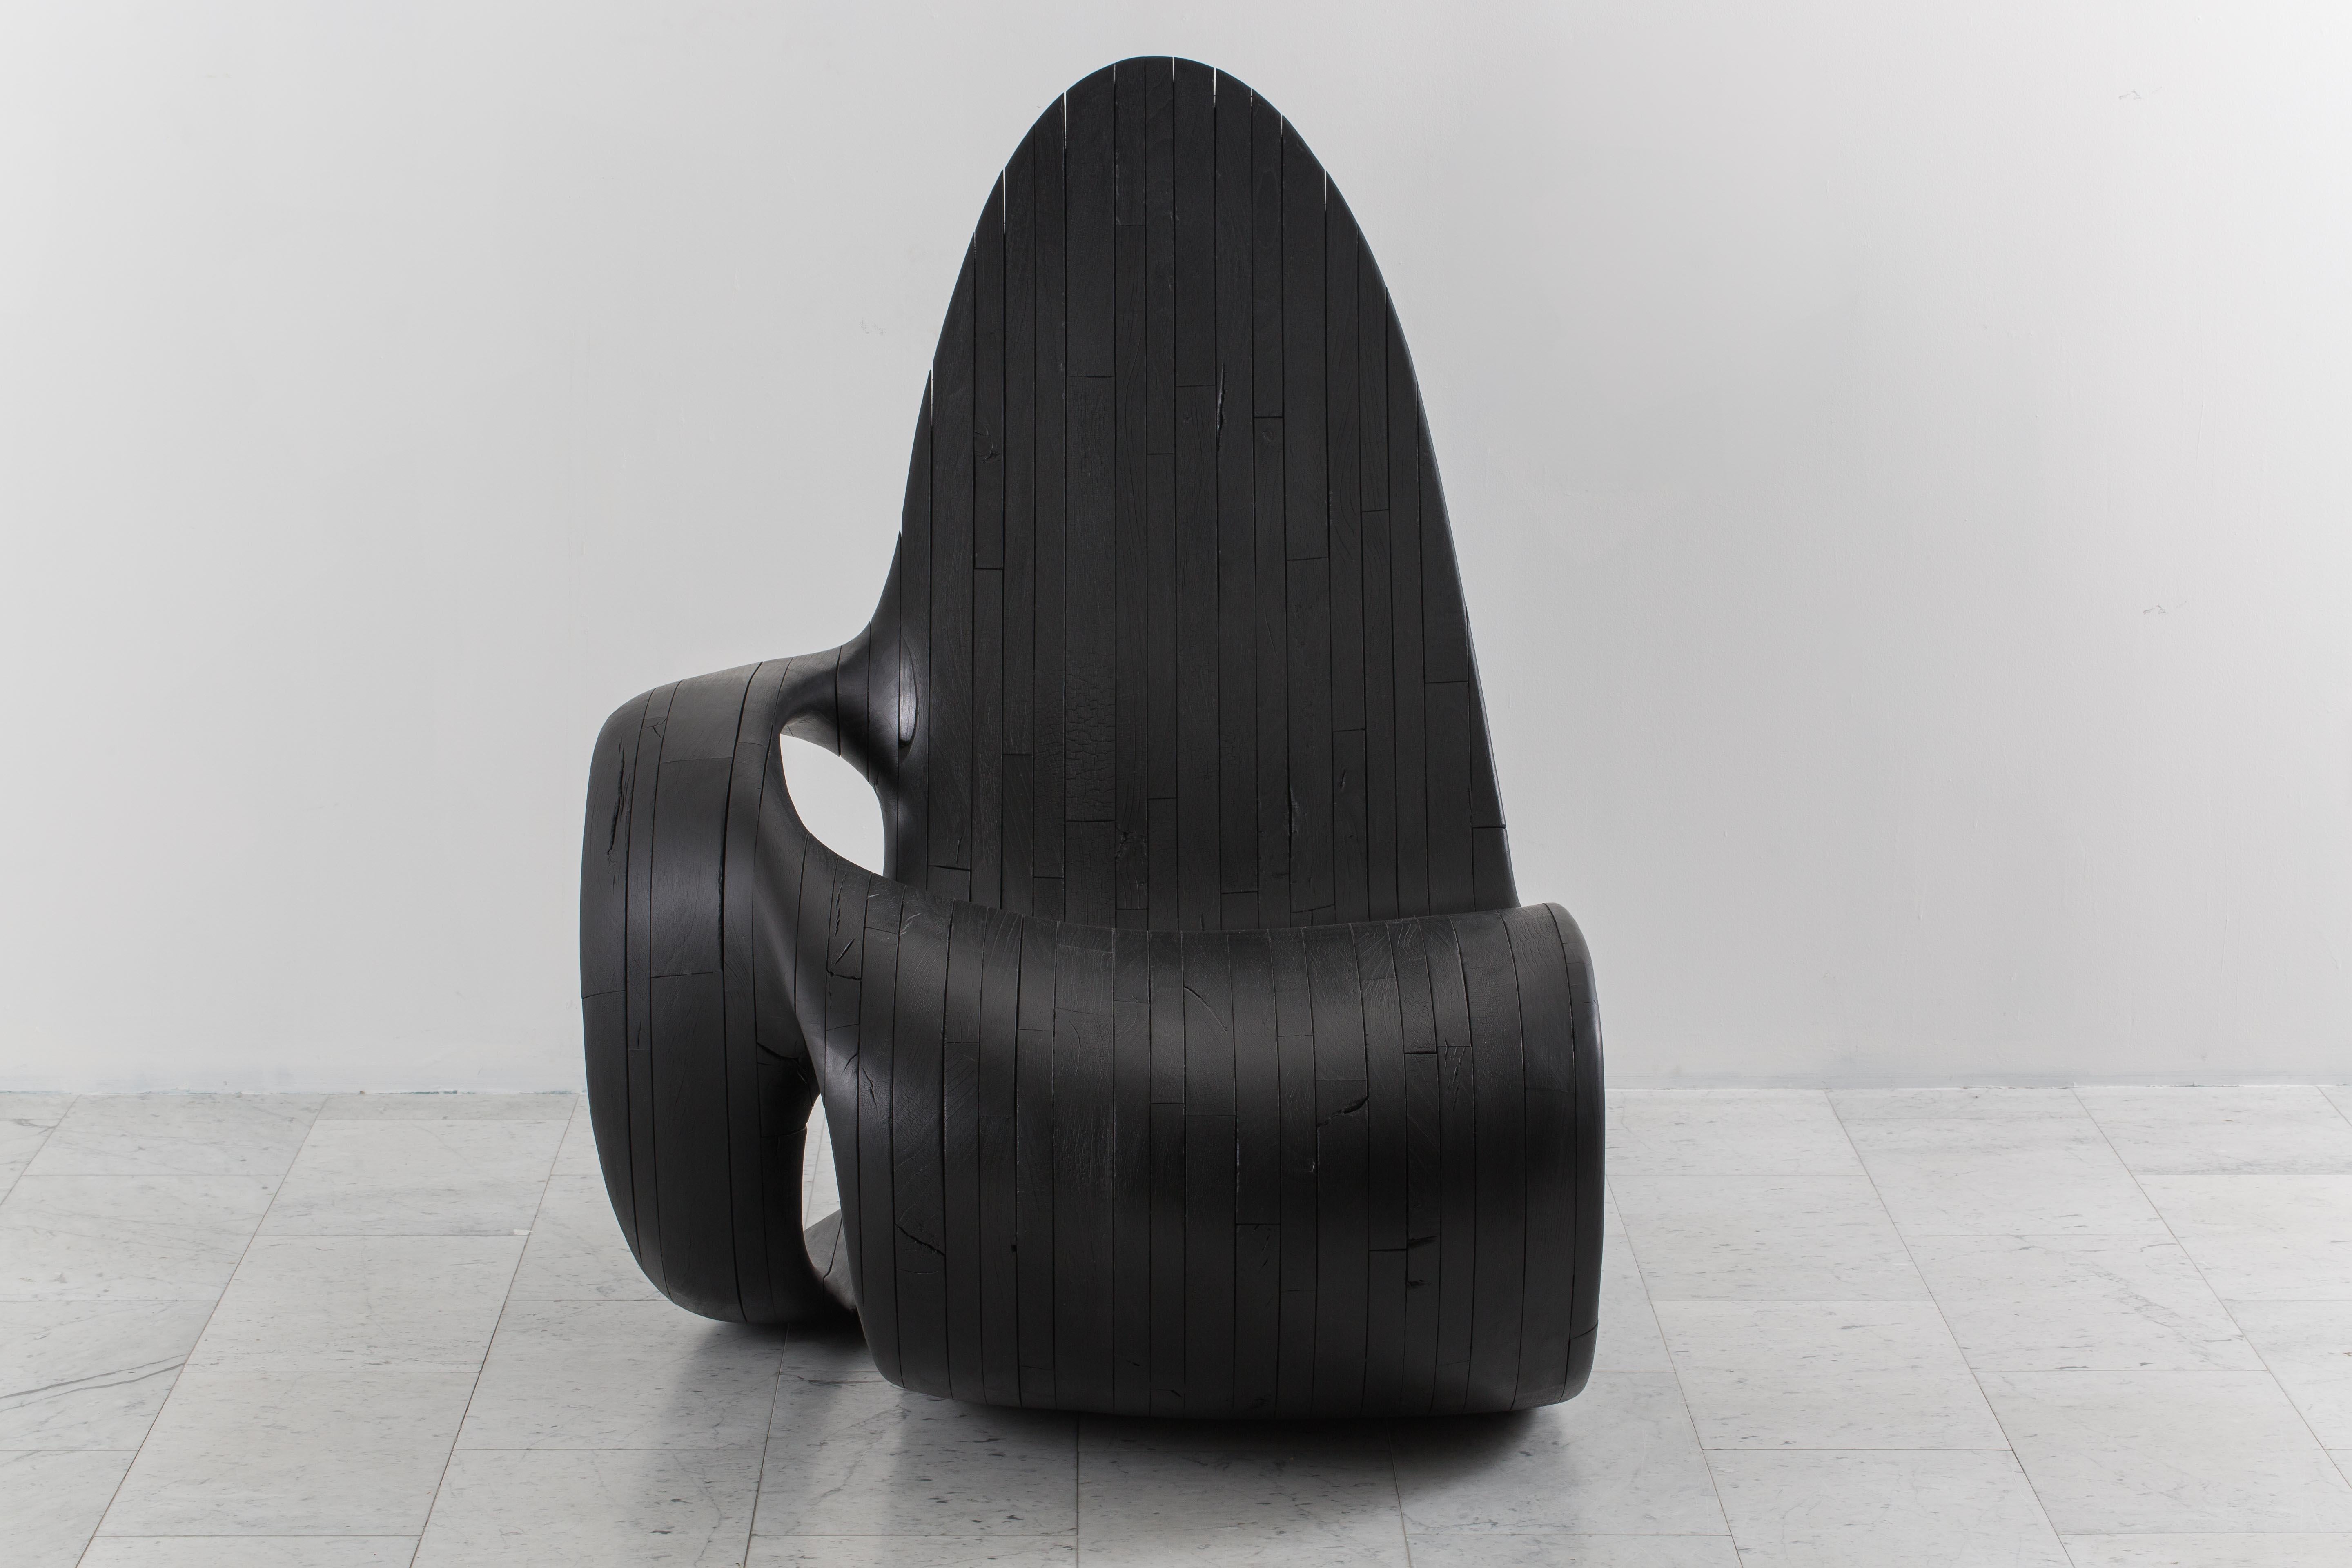 A unique, material-driven sculptural chair by Ian Spencer and Cairn Young of Yard Sale Project, Black Tongue explores unprecedented forms in wood. The wood is finished using the shou-sugiban method, an ancient Japanese finishing technique that